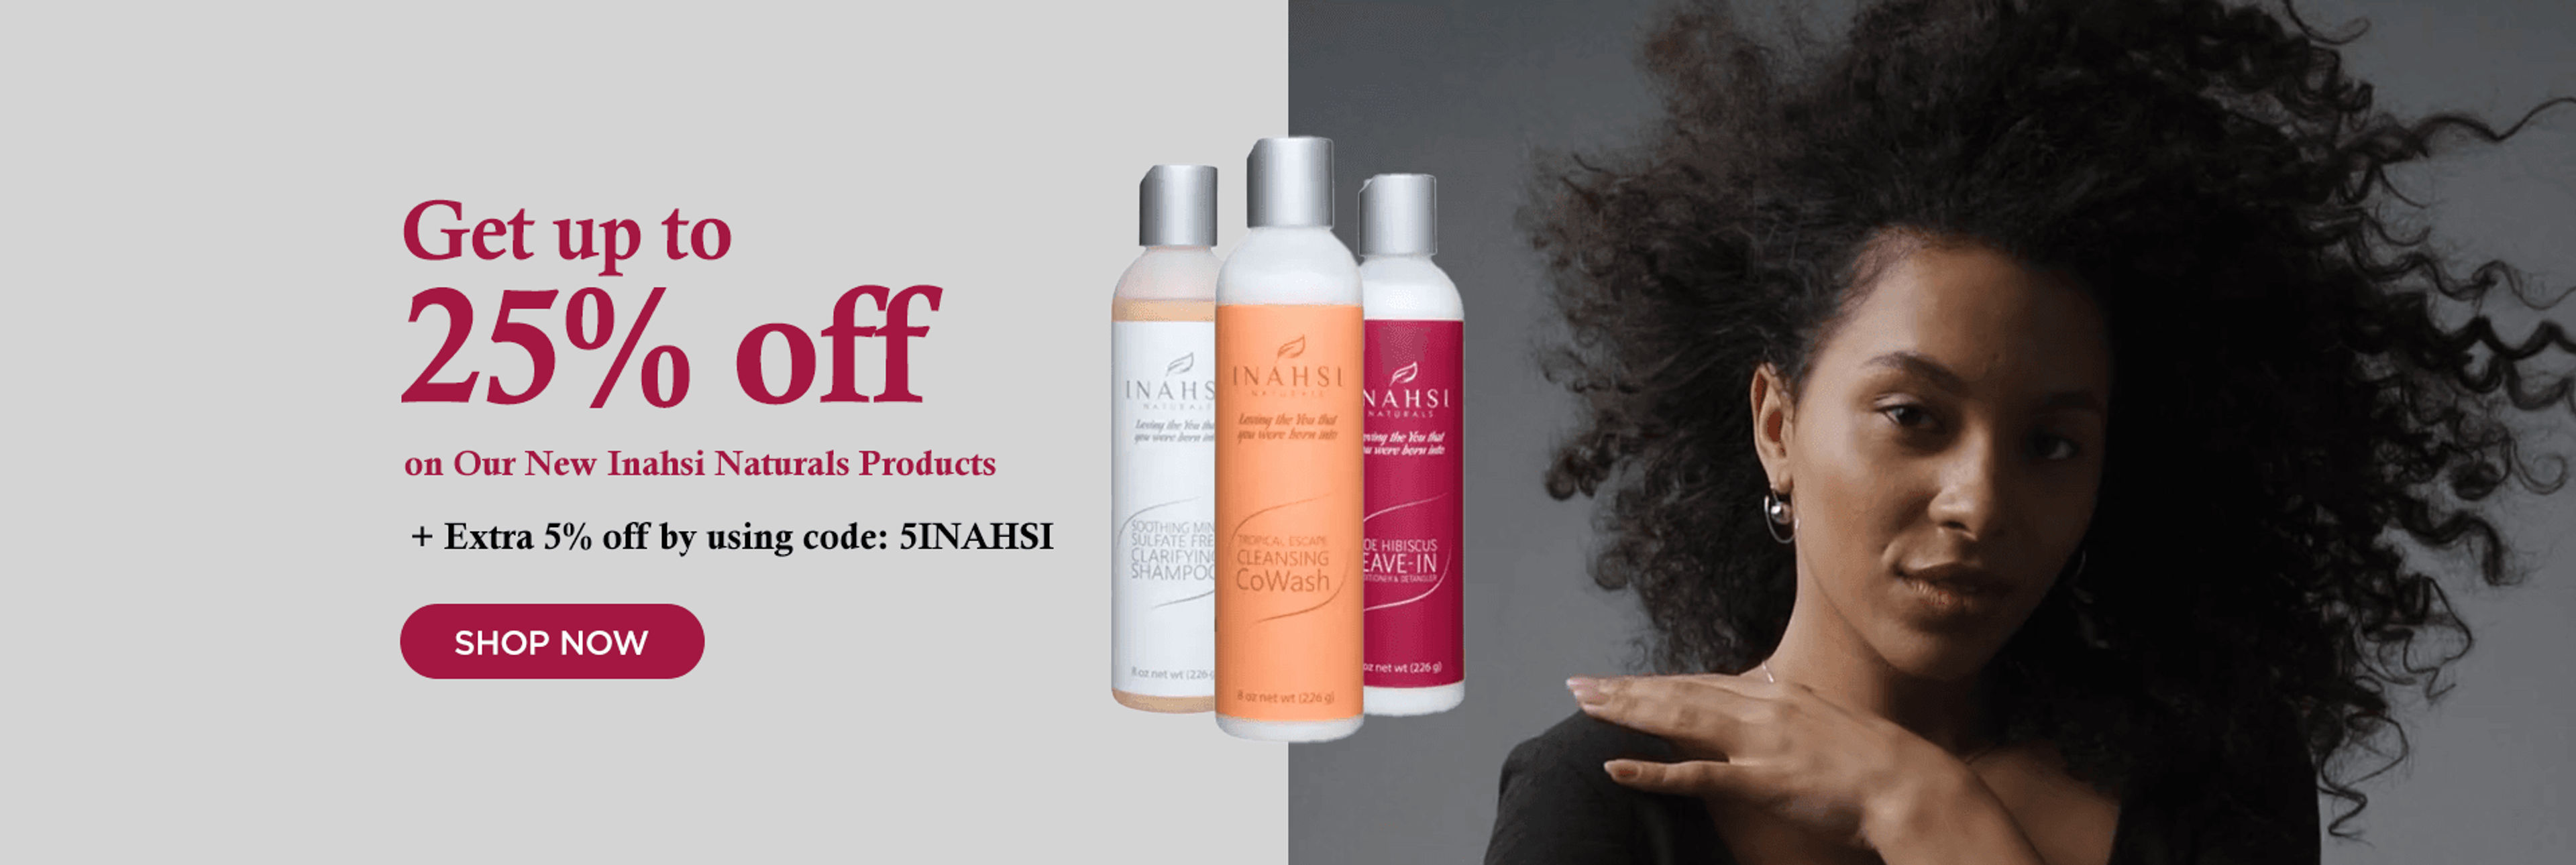 Get up to 25% off on Our New Inahsi Naturals Products + Extra 5% off by using code